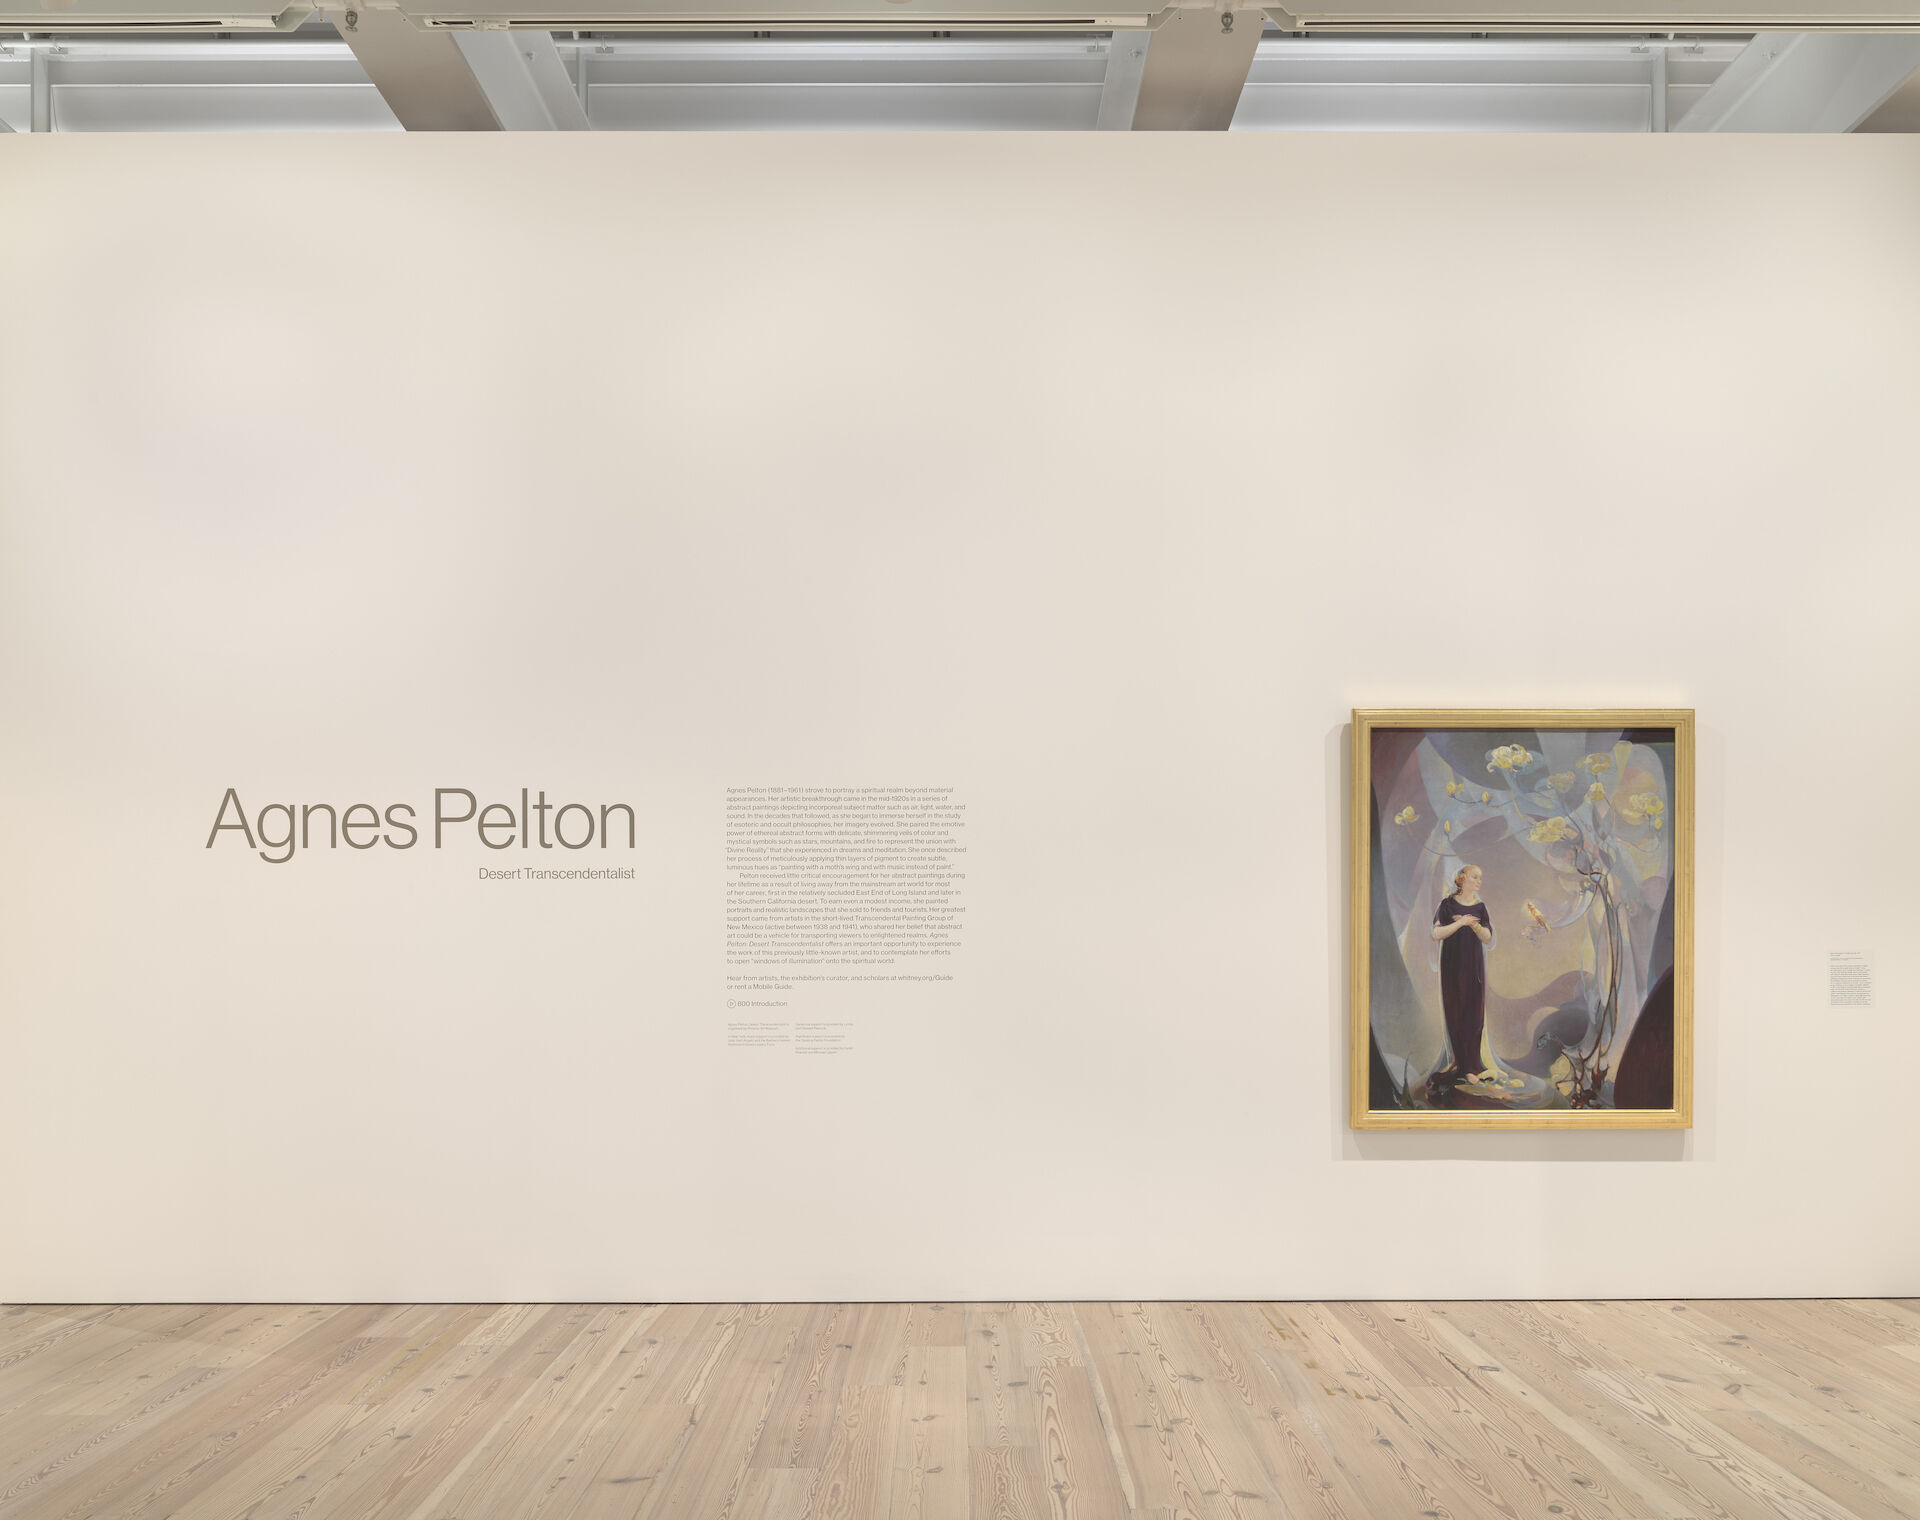 Room Decoration in Purple and Gray, 1917 by Agnes Pelton appears on a white wall in the Whitney next to text on the wall reading, "Agnes Pelton, Desert Transcendentalist."